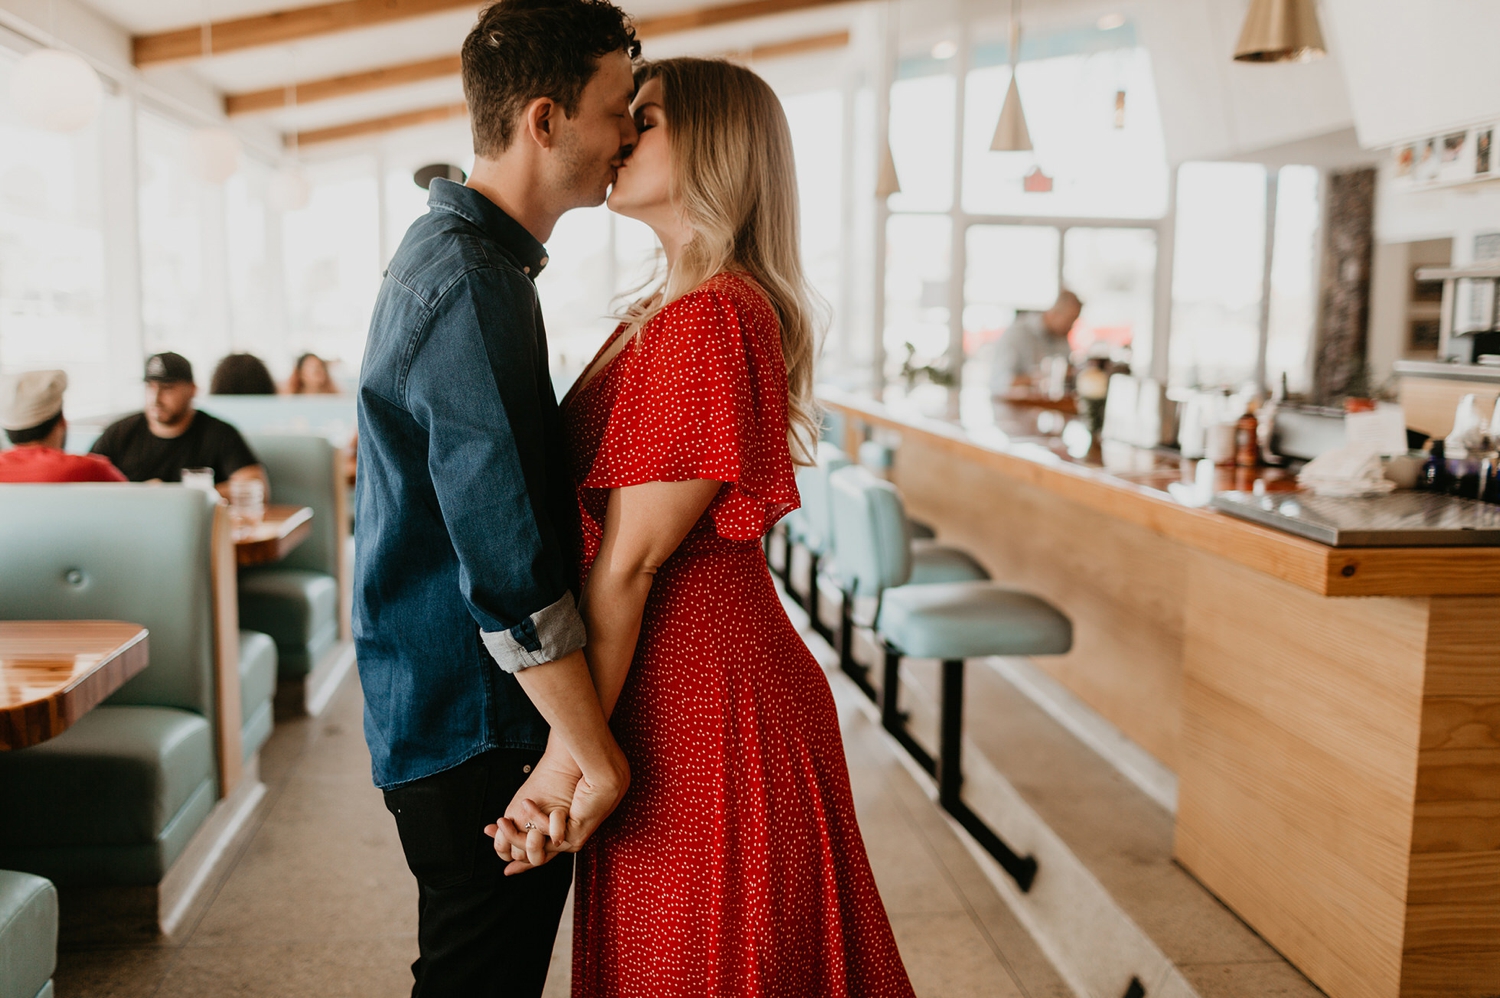 Welcome Diner Tucson Arizona Engagement session